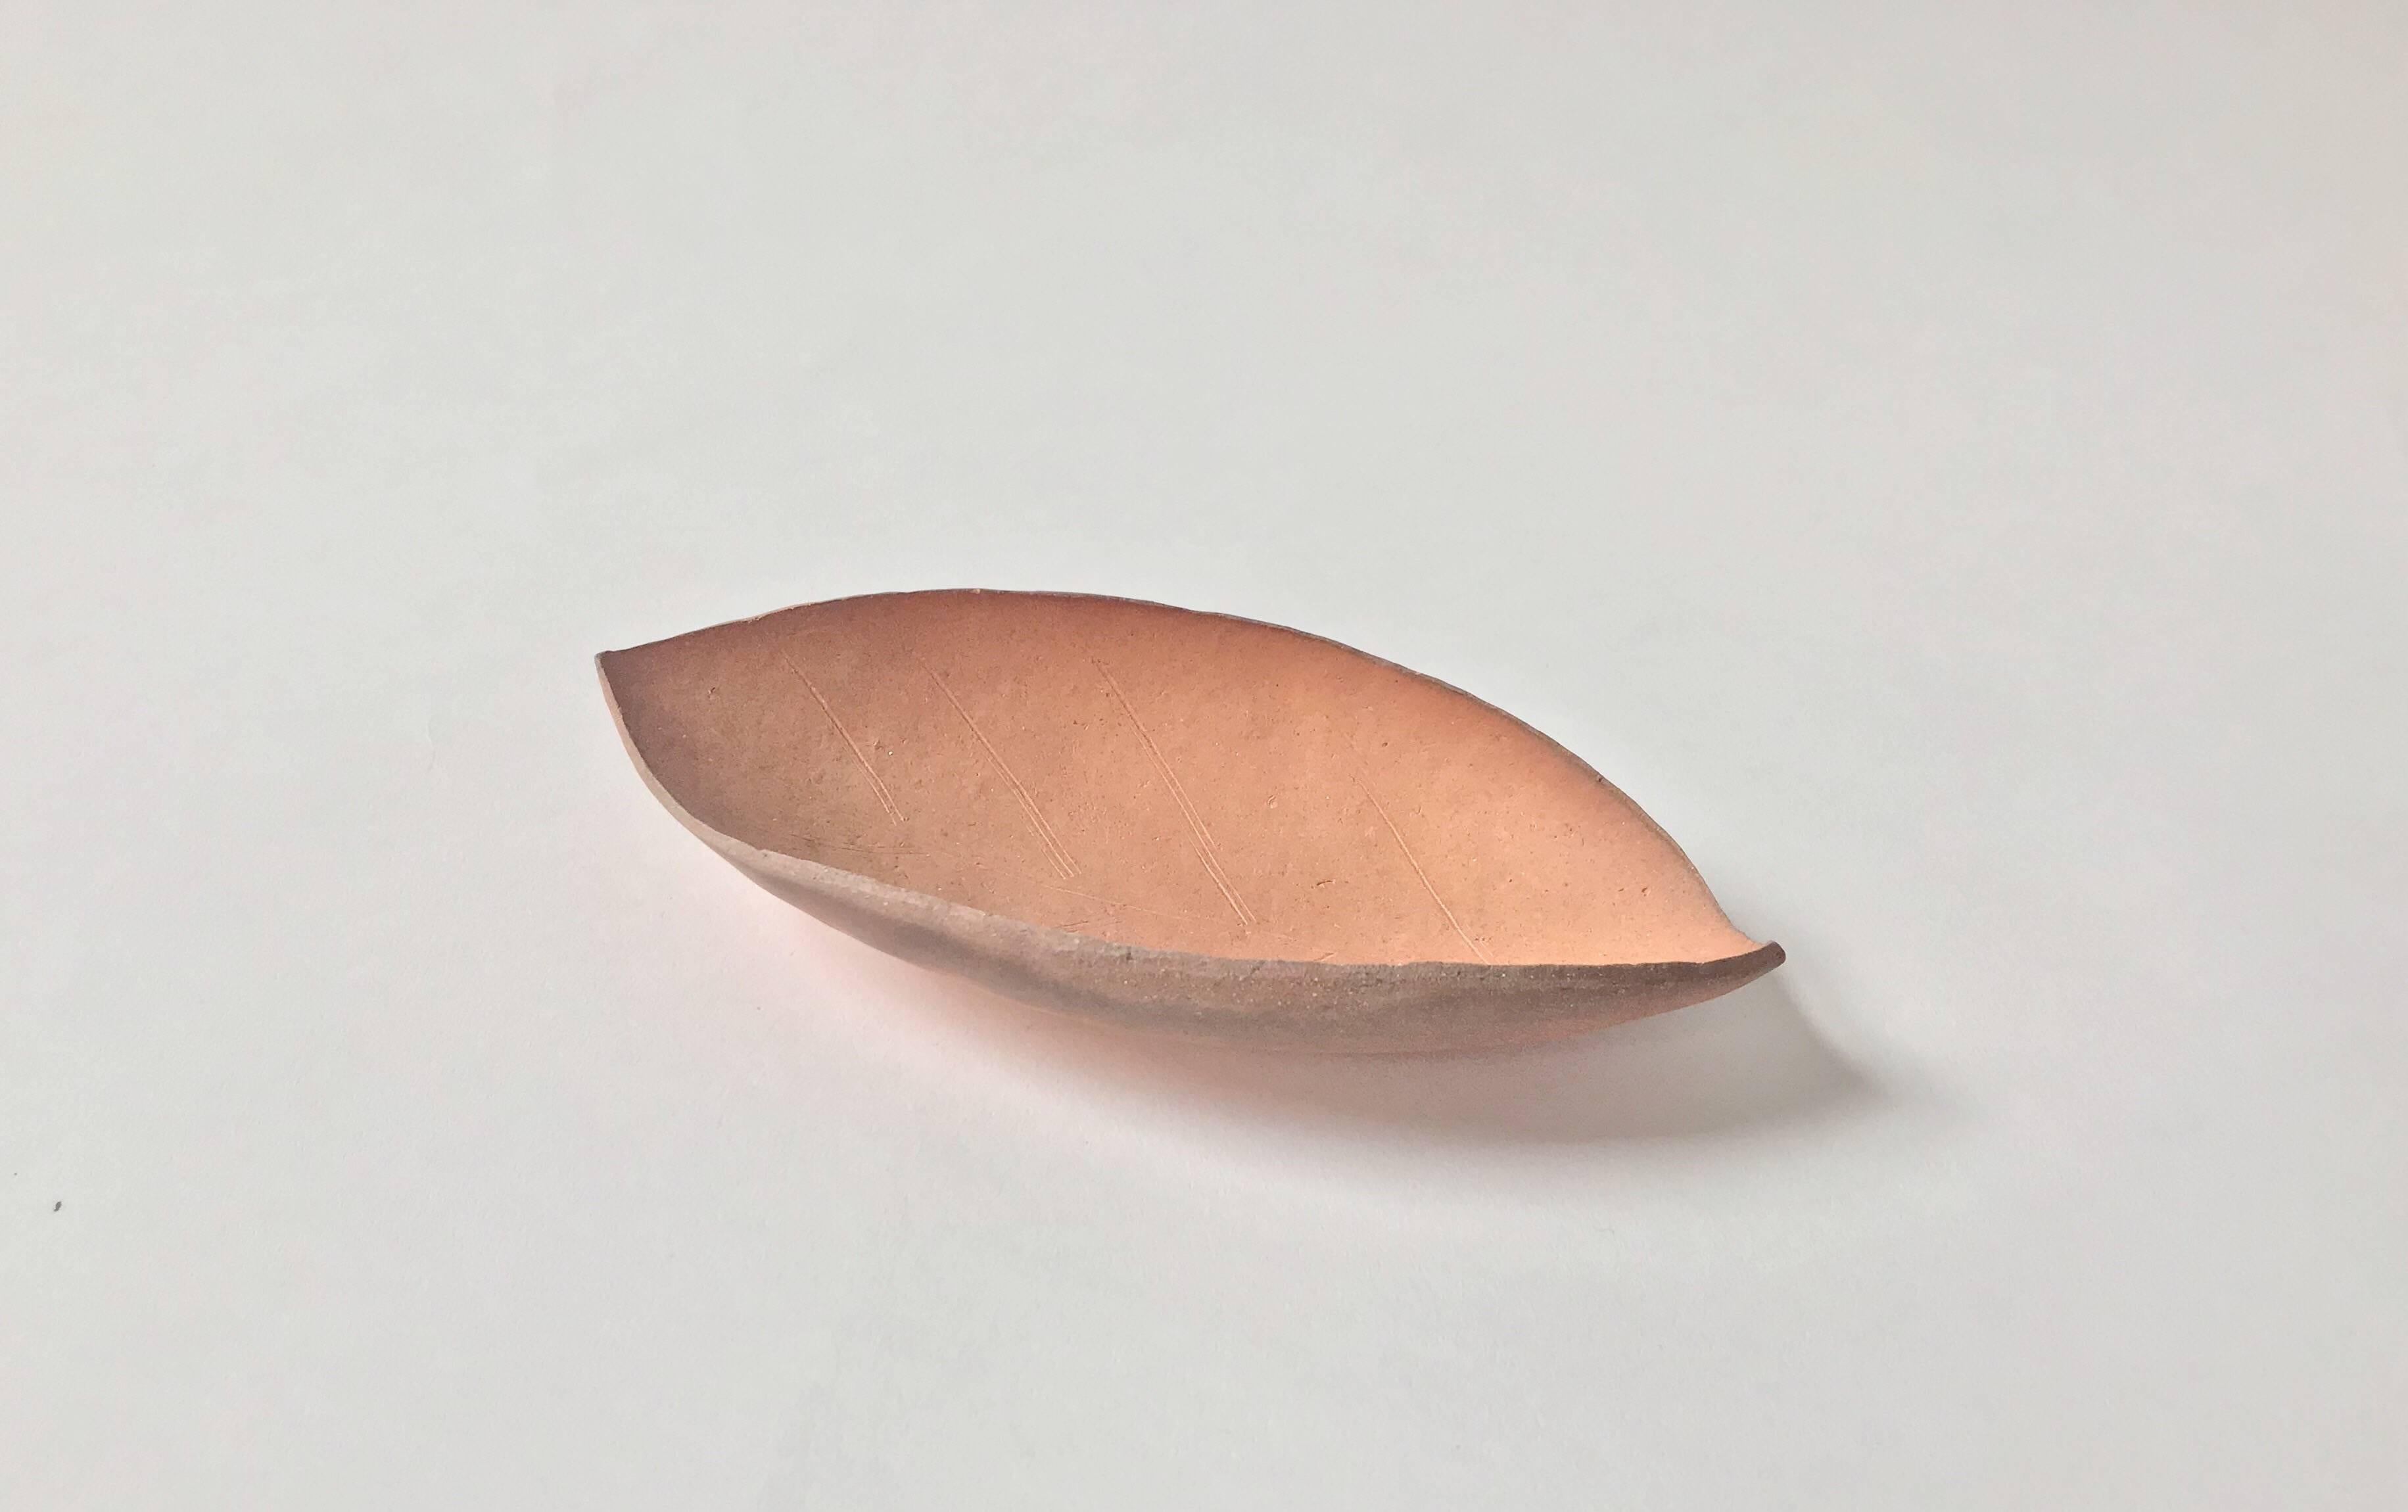 A leaf-shaped, terracotta-colour ceramic plate by Yosuke Kojima. Shown at WAD Gallery in Osaka in 2018 and in our exhibition Tea Ceremony which opened in May 2018. 